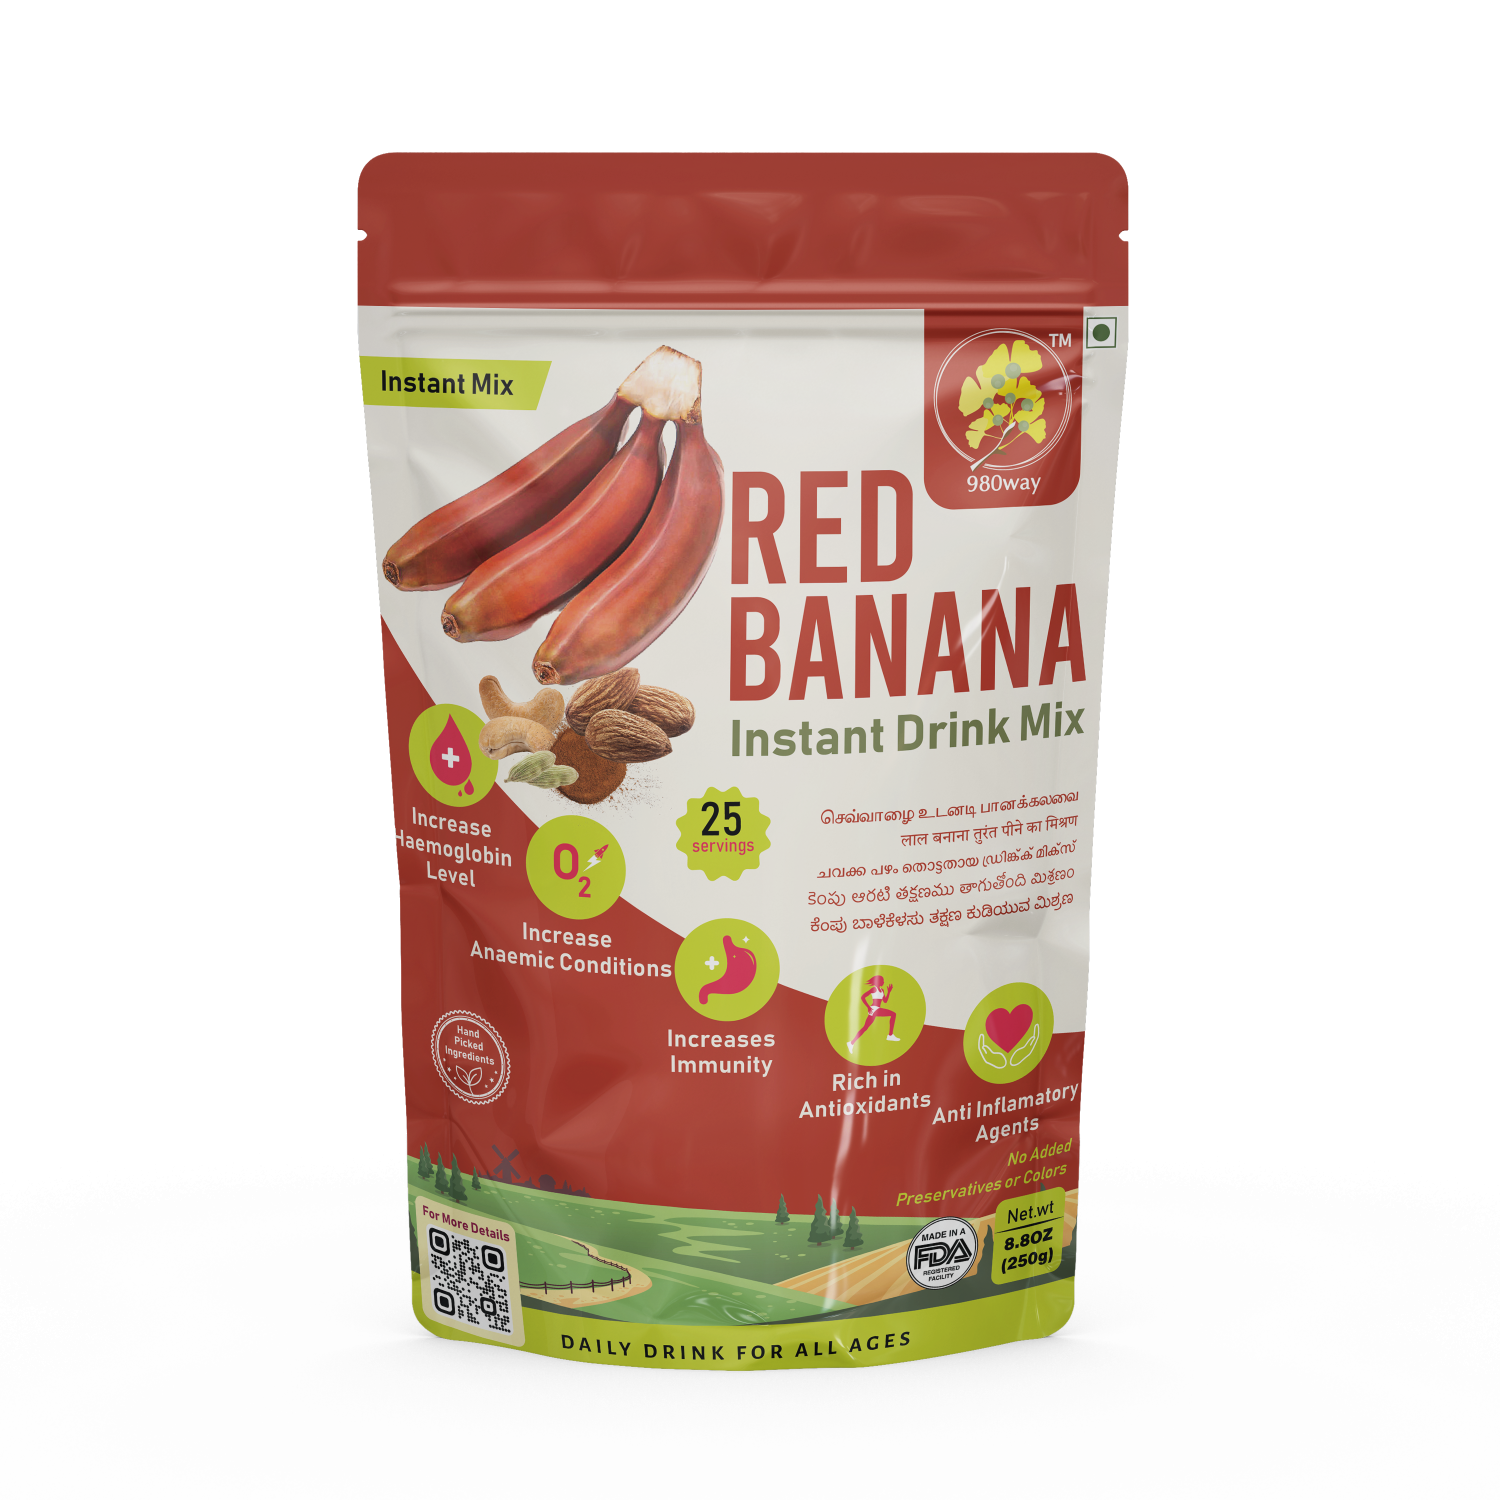 Red Banana Instant Drink Mix